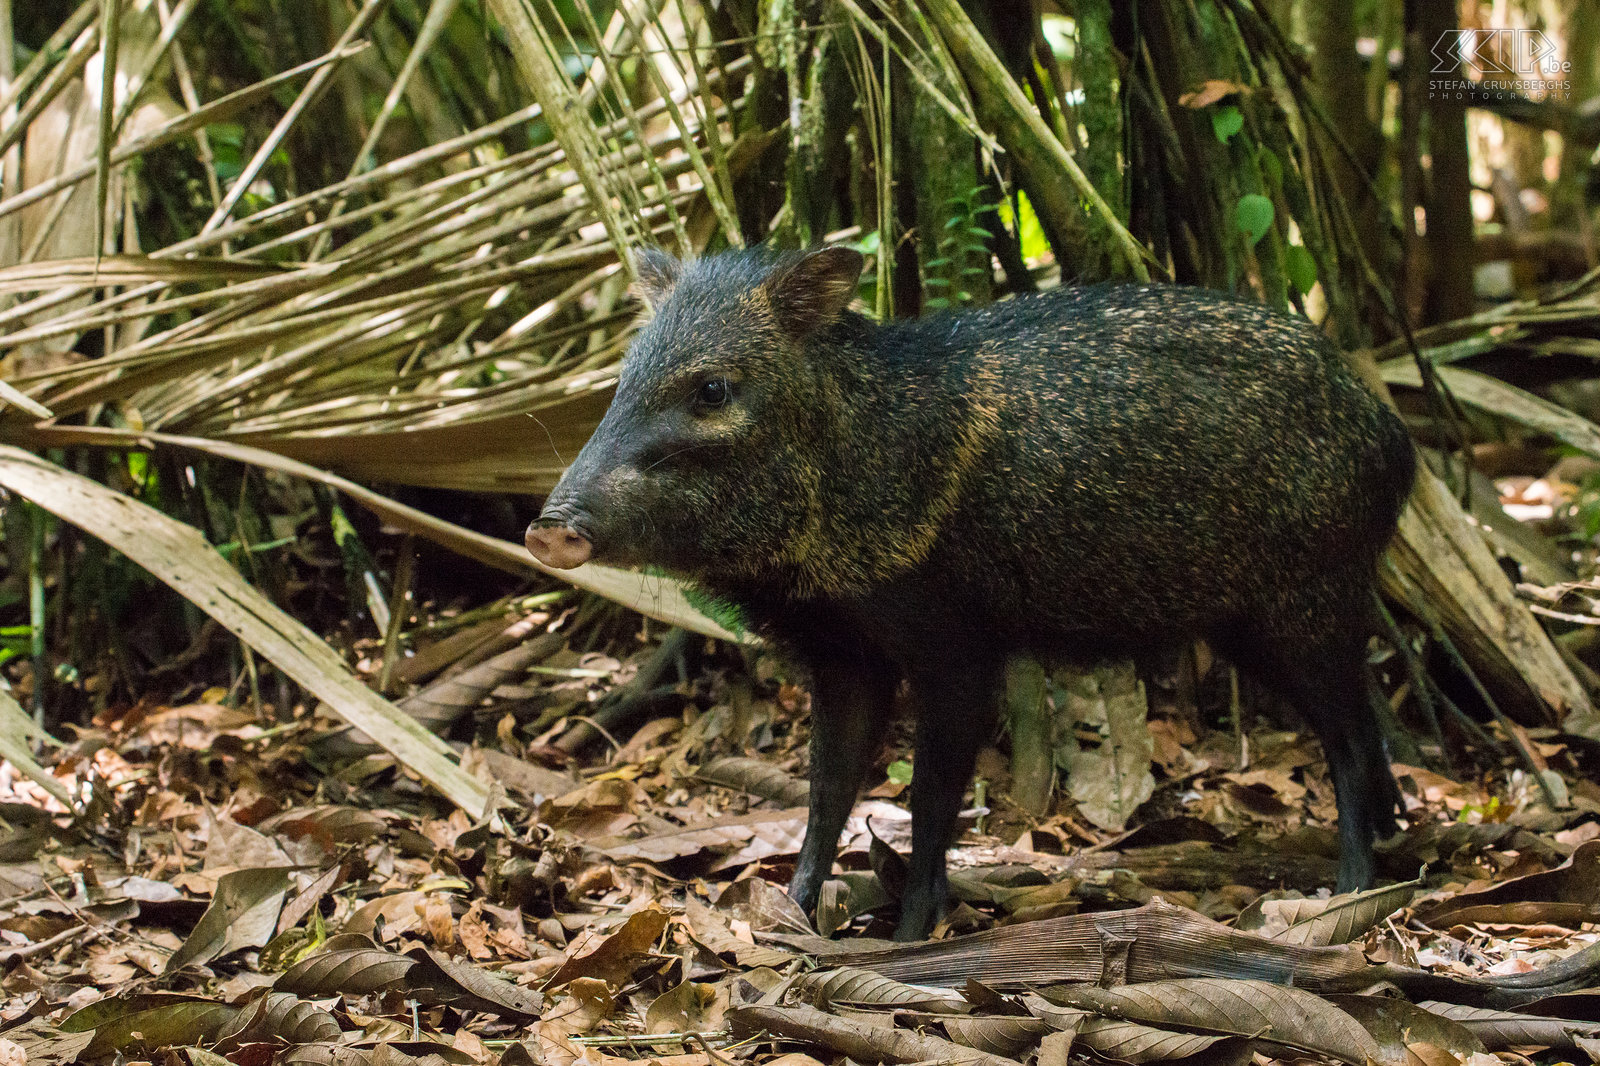 La Selva - Collared peccary The collared peccary (pecari tajacu) is a widespread mammal found throughout much of the tropical and subtropical Americas. They are diurnal animals that feed on fruits, roots, tubers, grasses, invertebrates, and small vertebrates. Stefan Cruysberghs